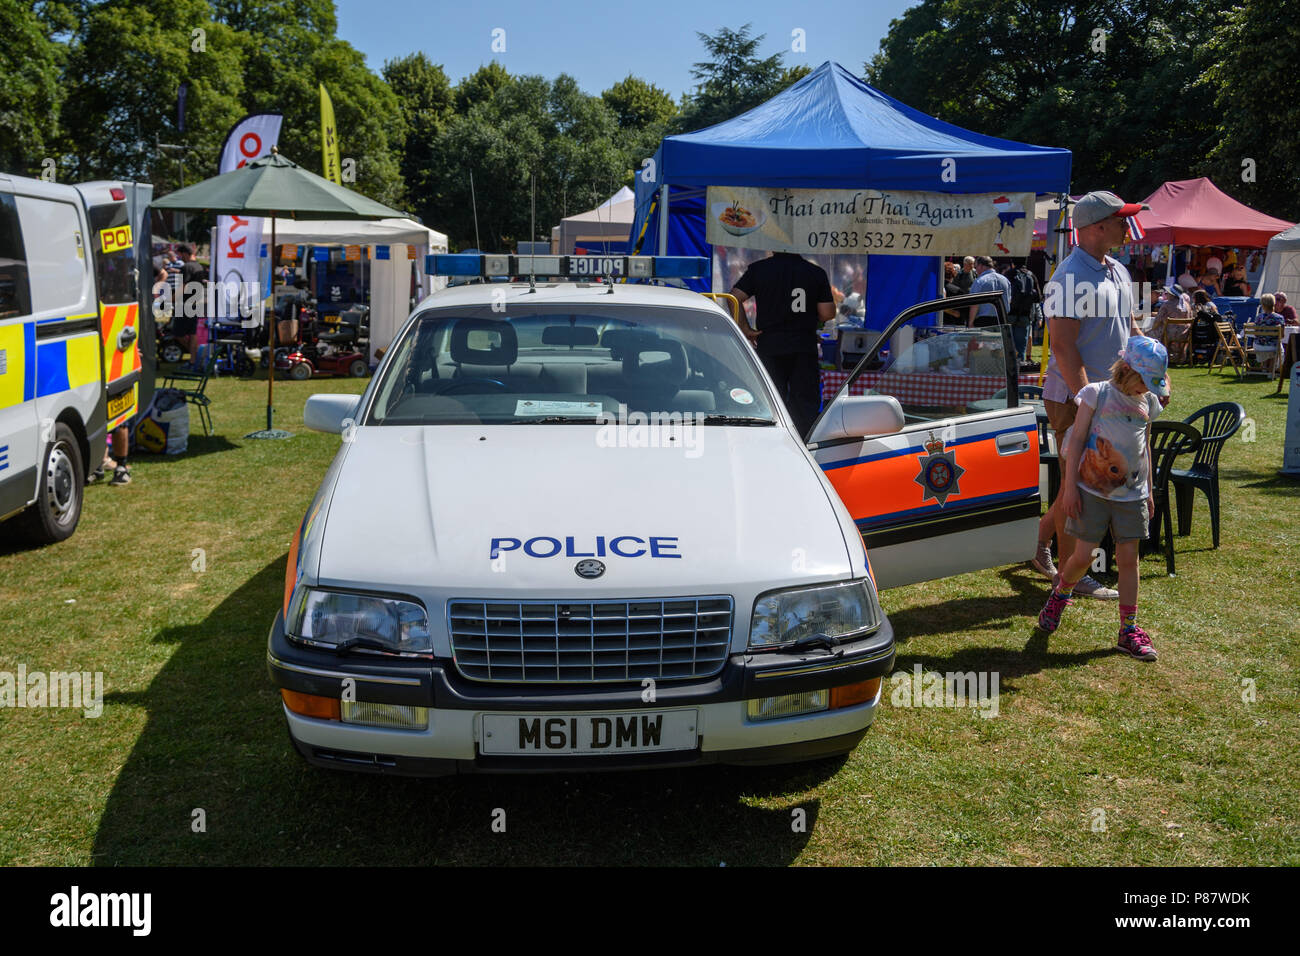 Classic police 3 liter vauxhall senator car on display for public in Trowbridge park at the armed forces celebration weekend Stock Photo